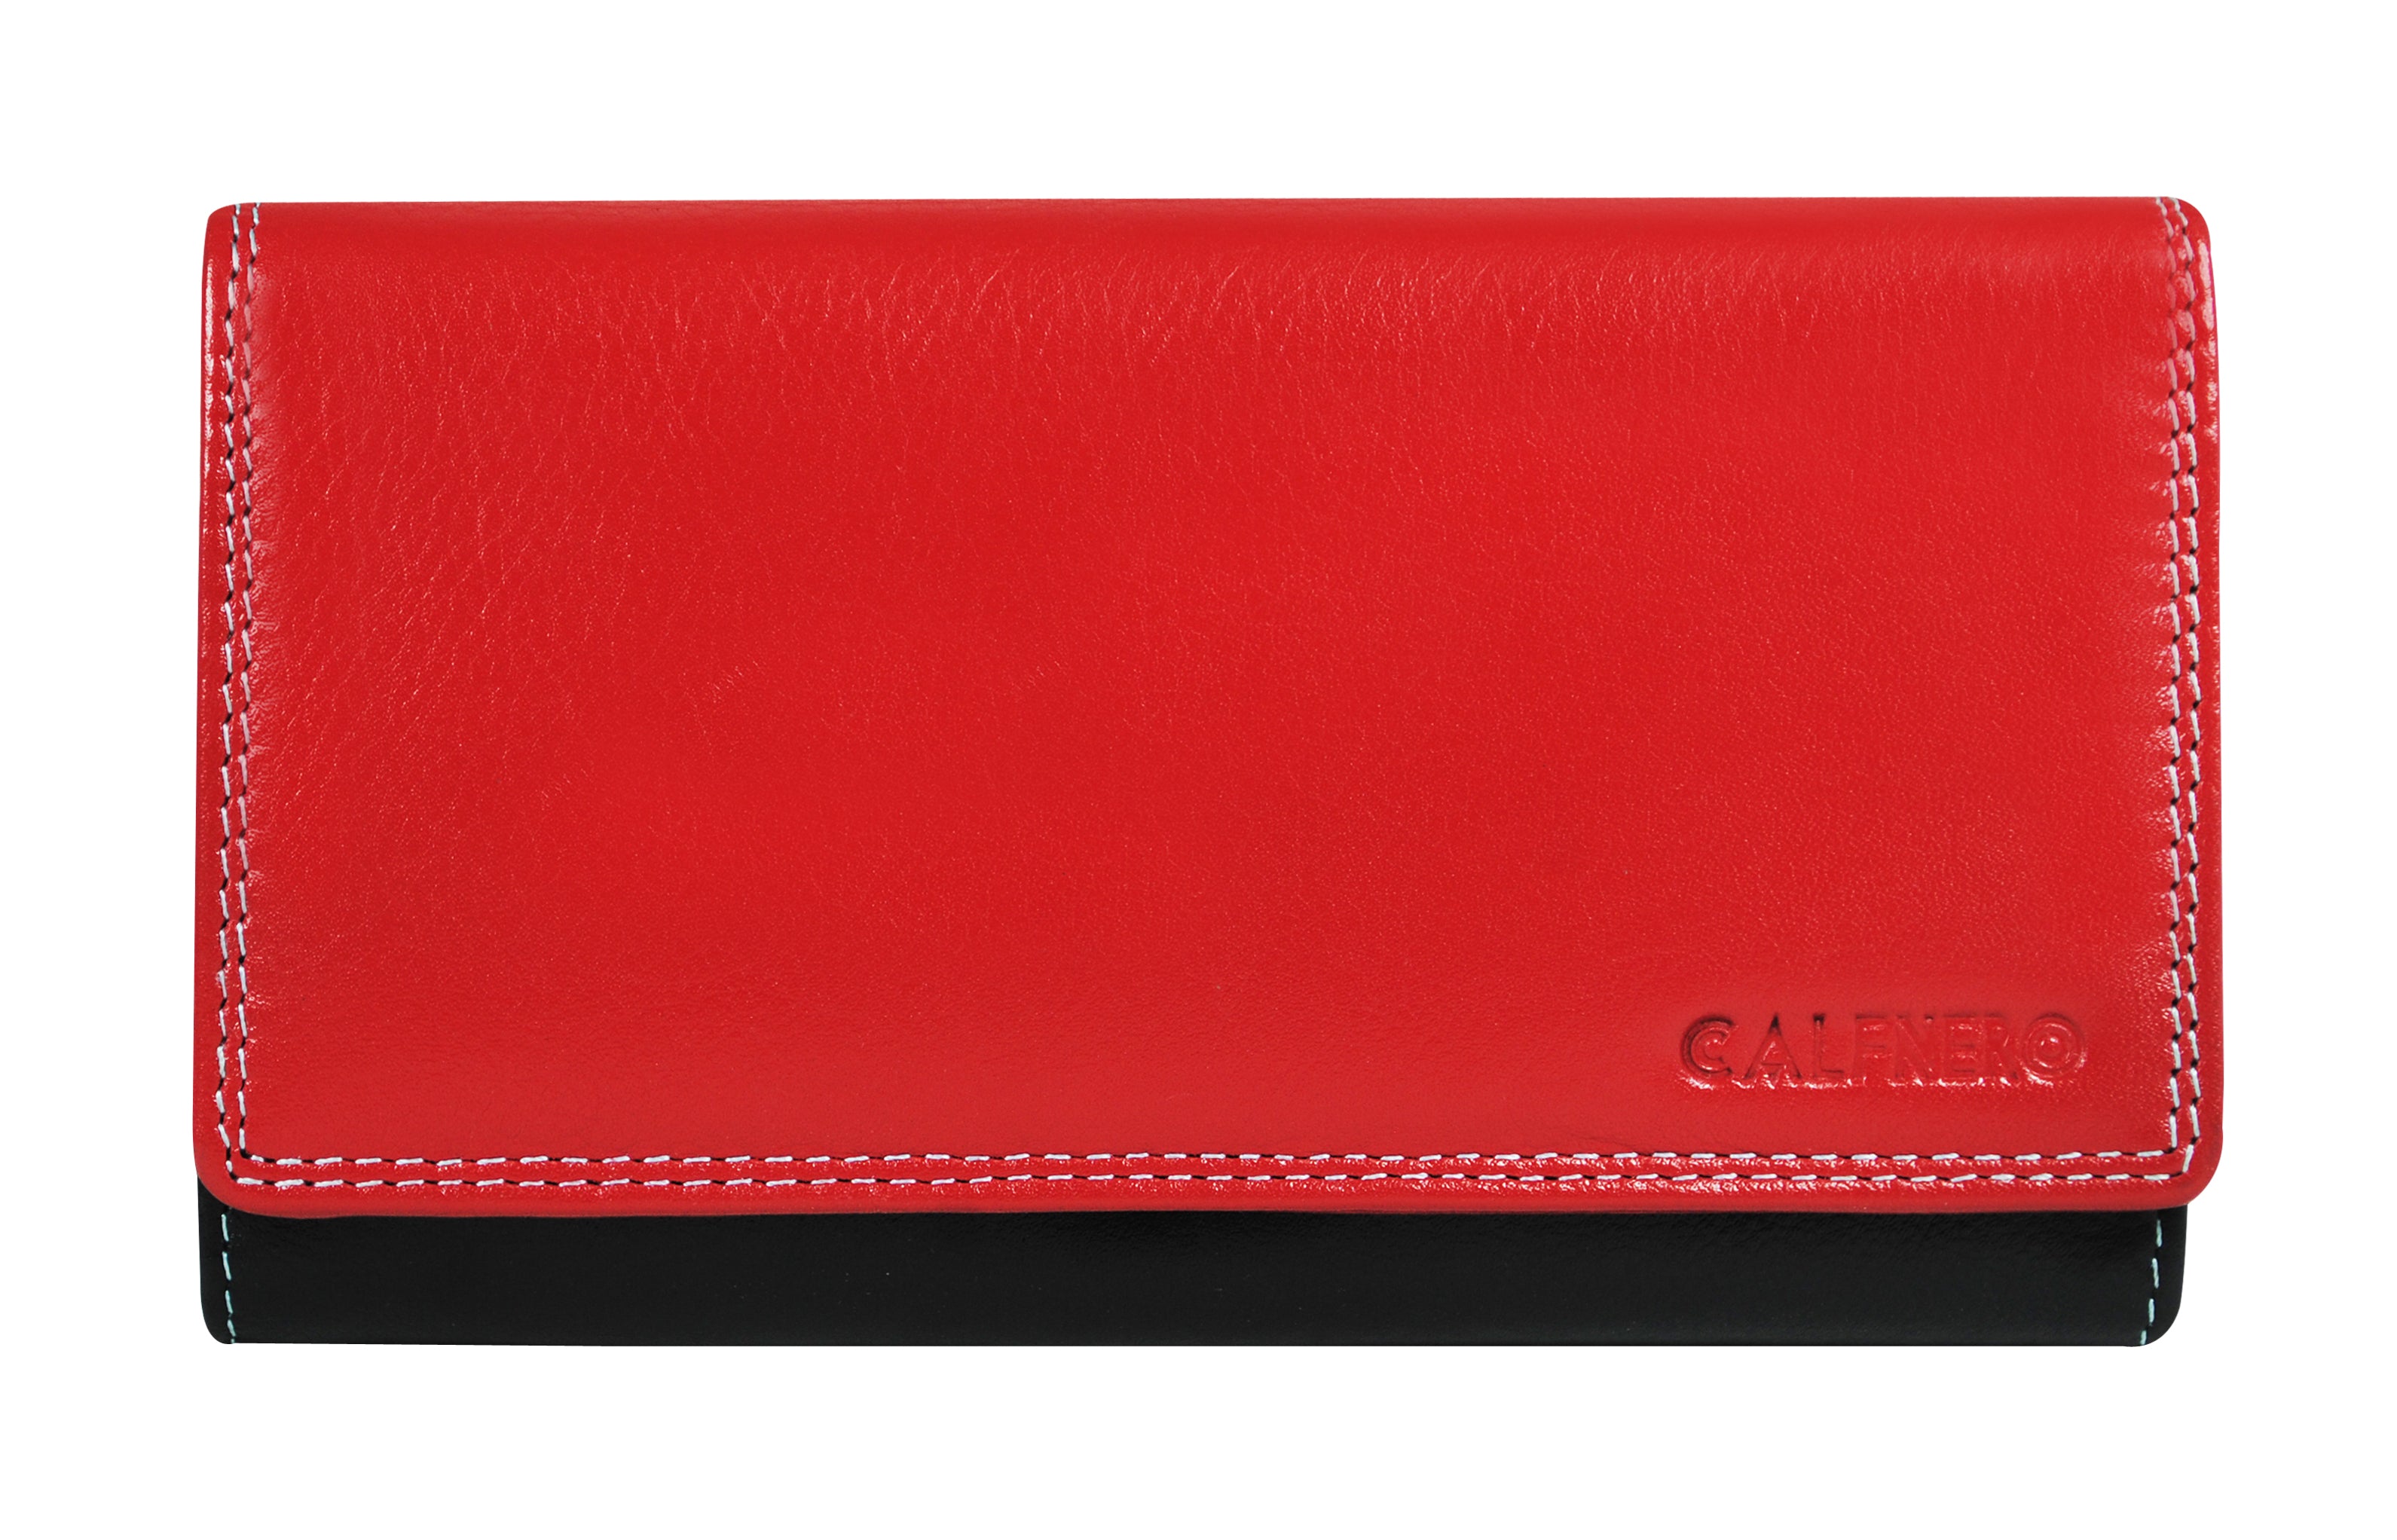 Cassetta |Red coin purse with flap